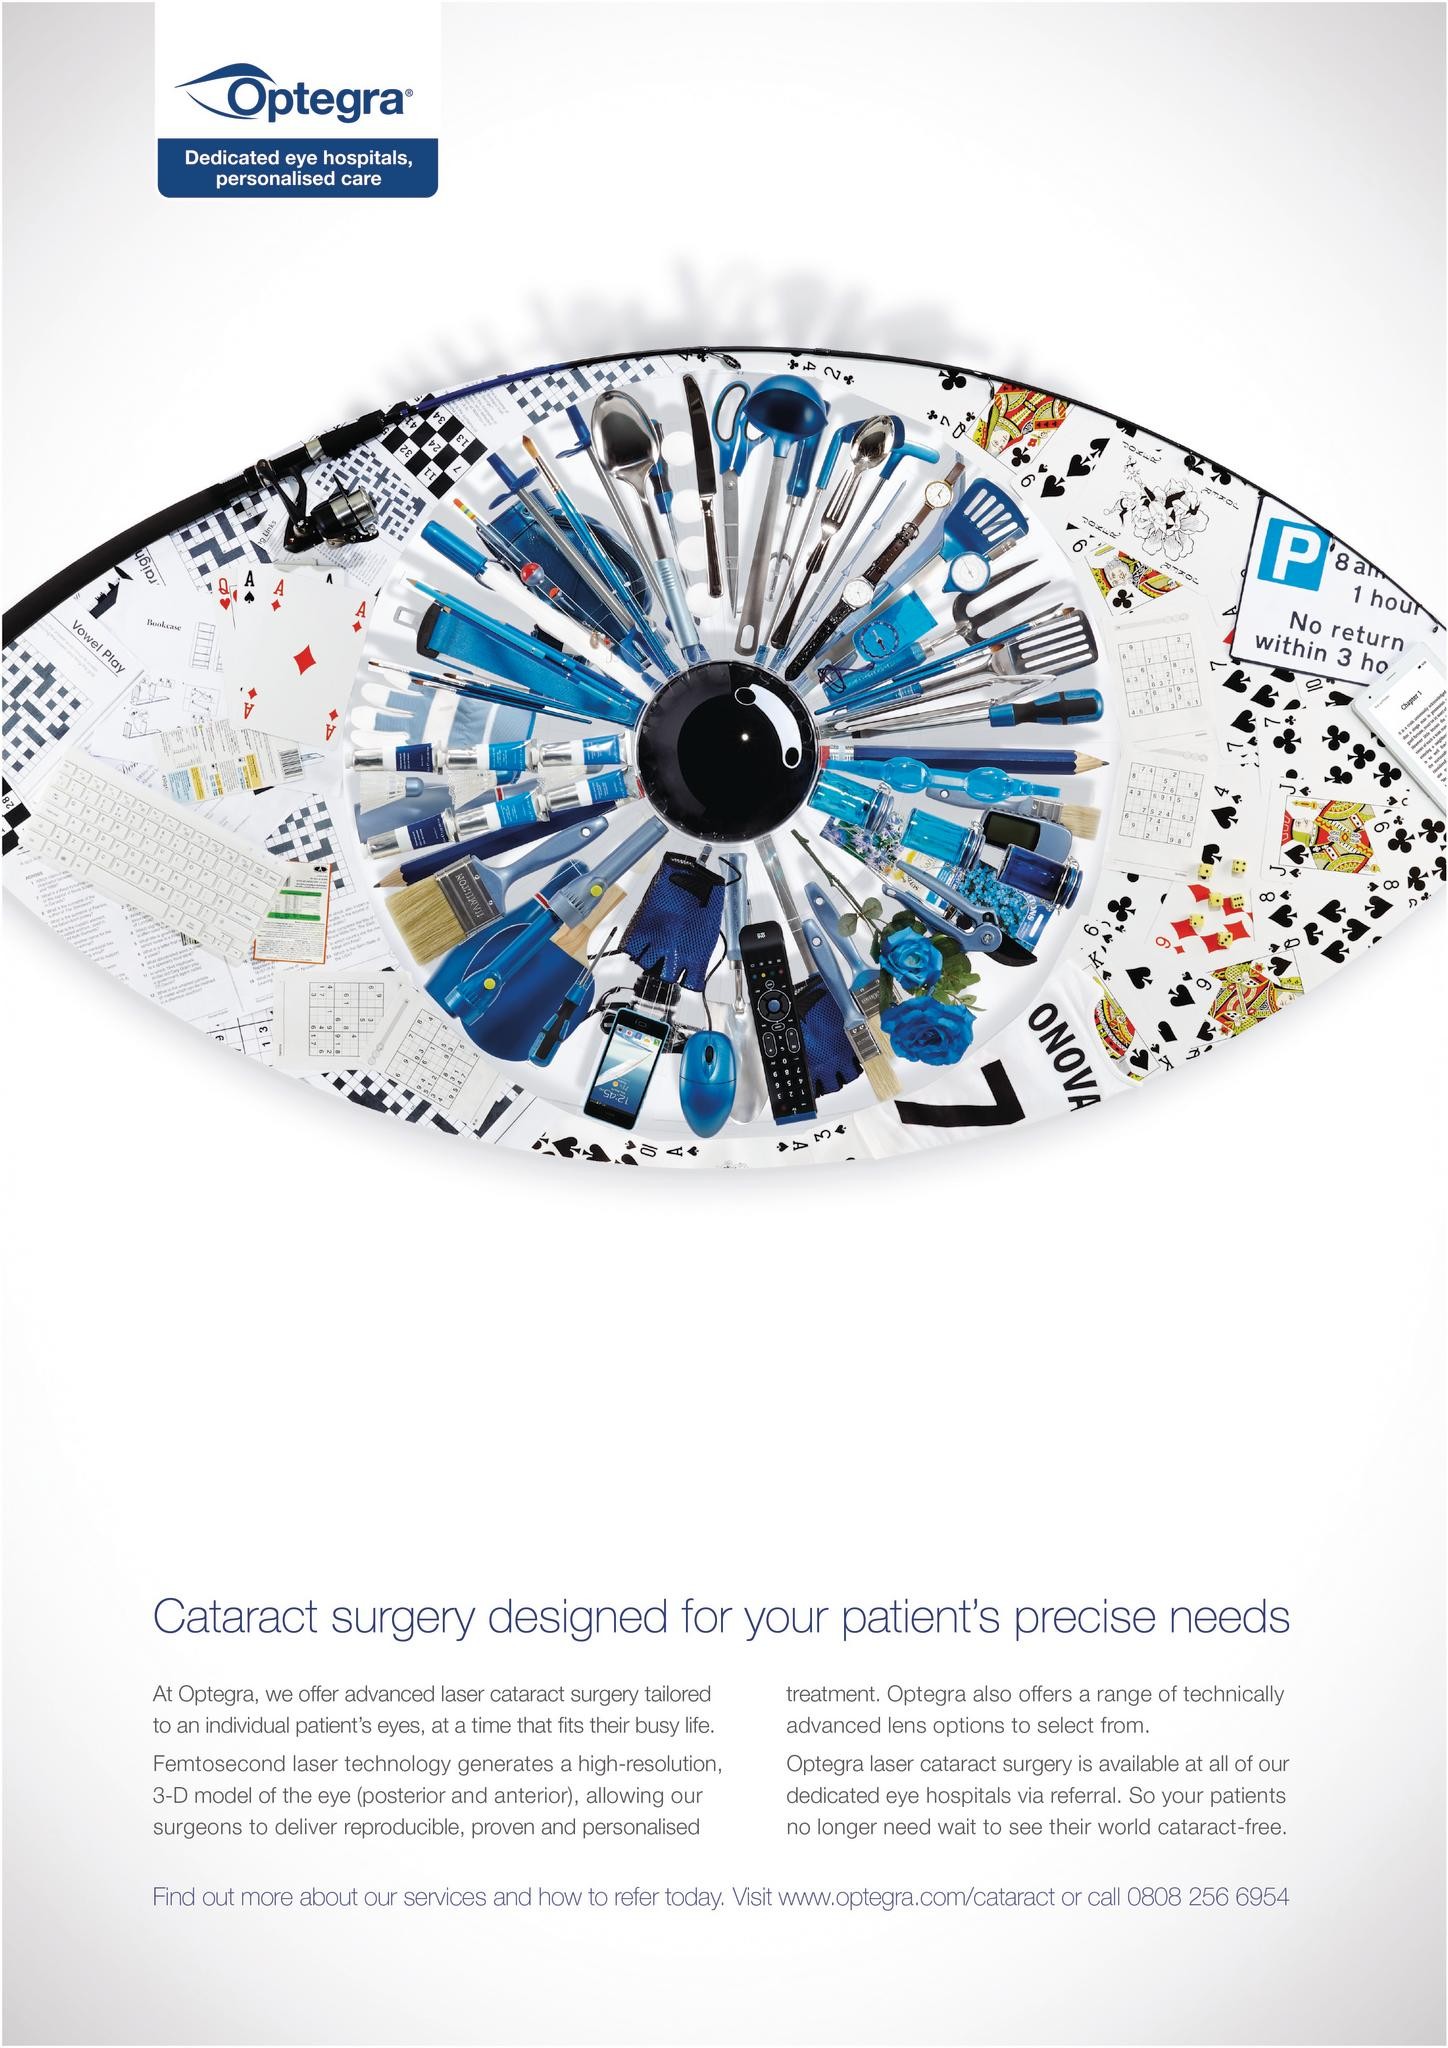 OPTEGRA - CATARACT SURGERY DESIGNED FOR YOUR PATIENT'S PRECISE NEEDS